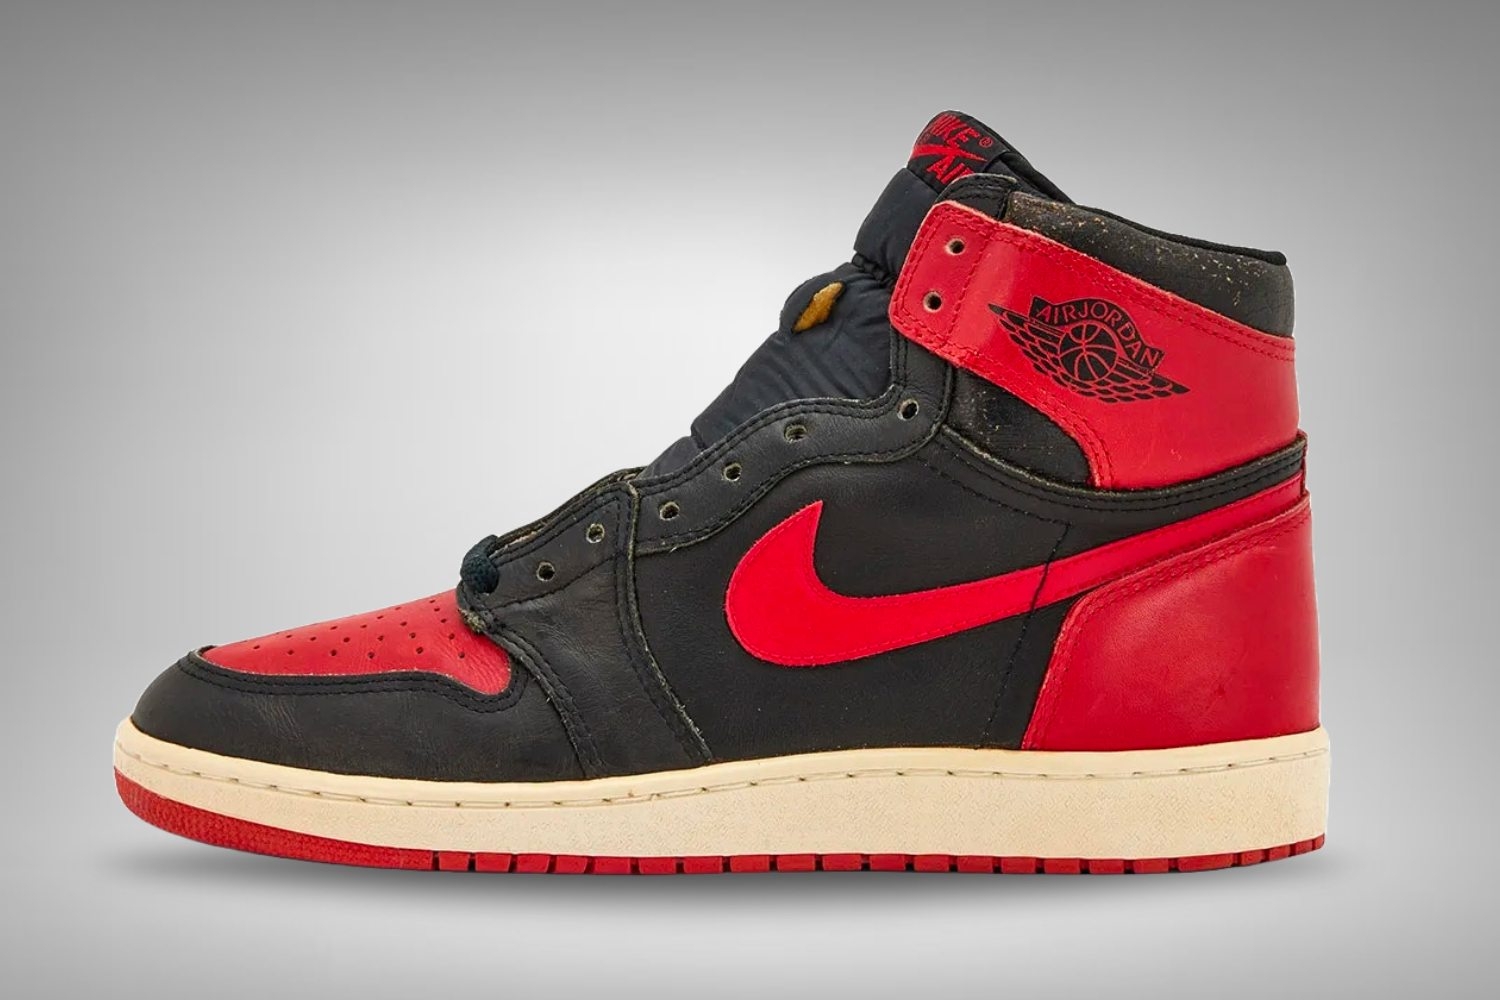 Will the Air Jordan 1 High '85 'Bred' make its comeback in 2025?